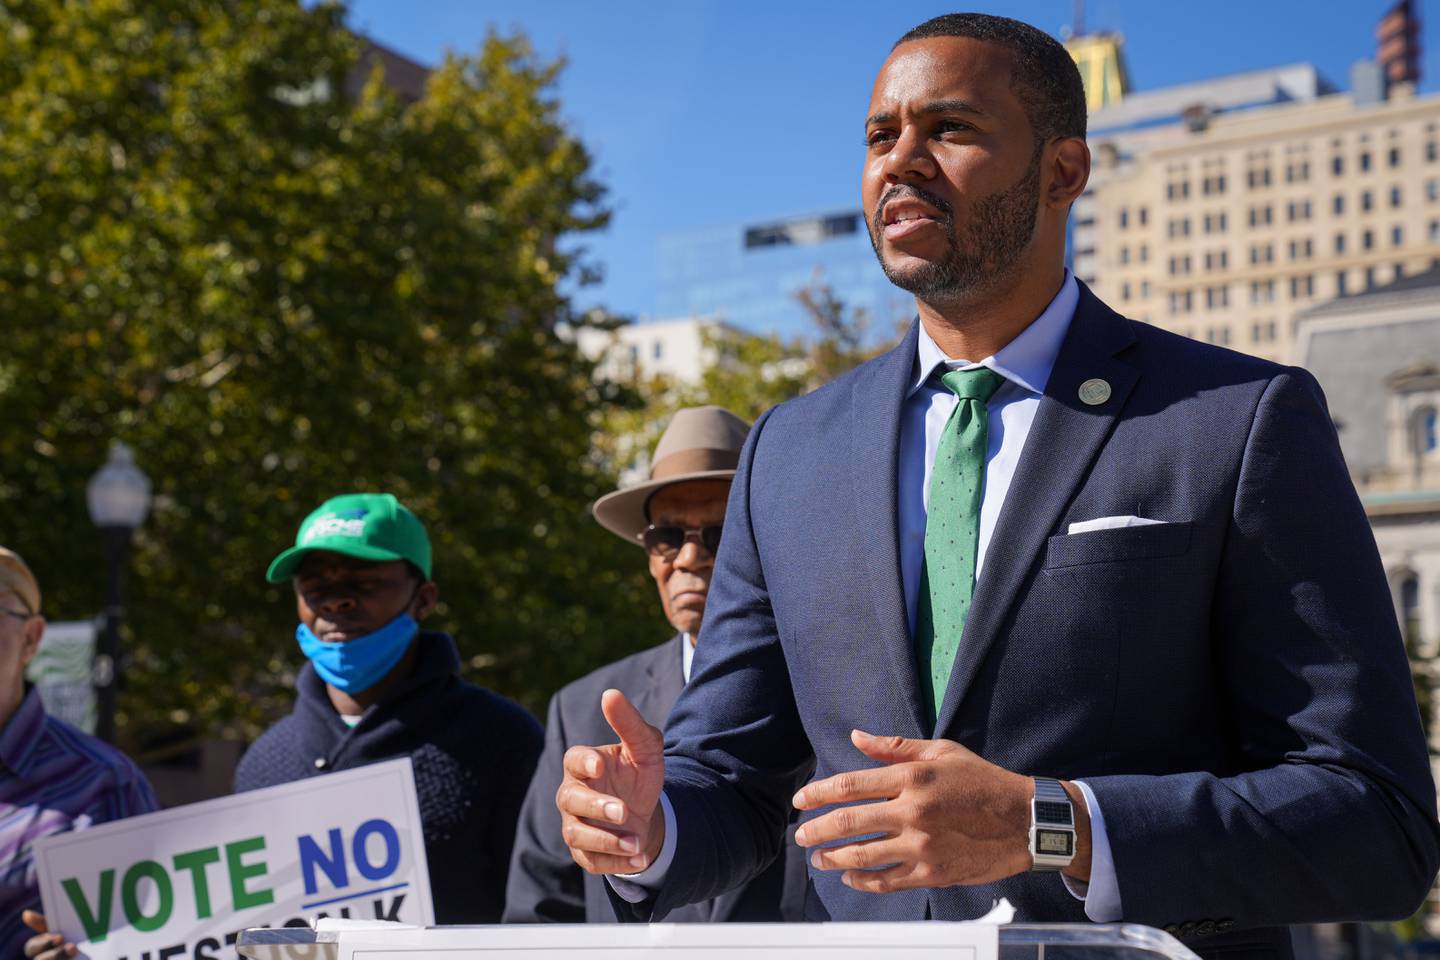 Joshua Harris, VP of Maryland’s chapter of the NAACP, speaks at a press conference at War Memorial Plaza on 10/6/22 to encourage voters to vote no on Question K in the upcoming general election. The question would determine whether or not term limits are imposed on a number of elected positions in the city.